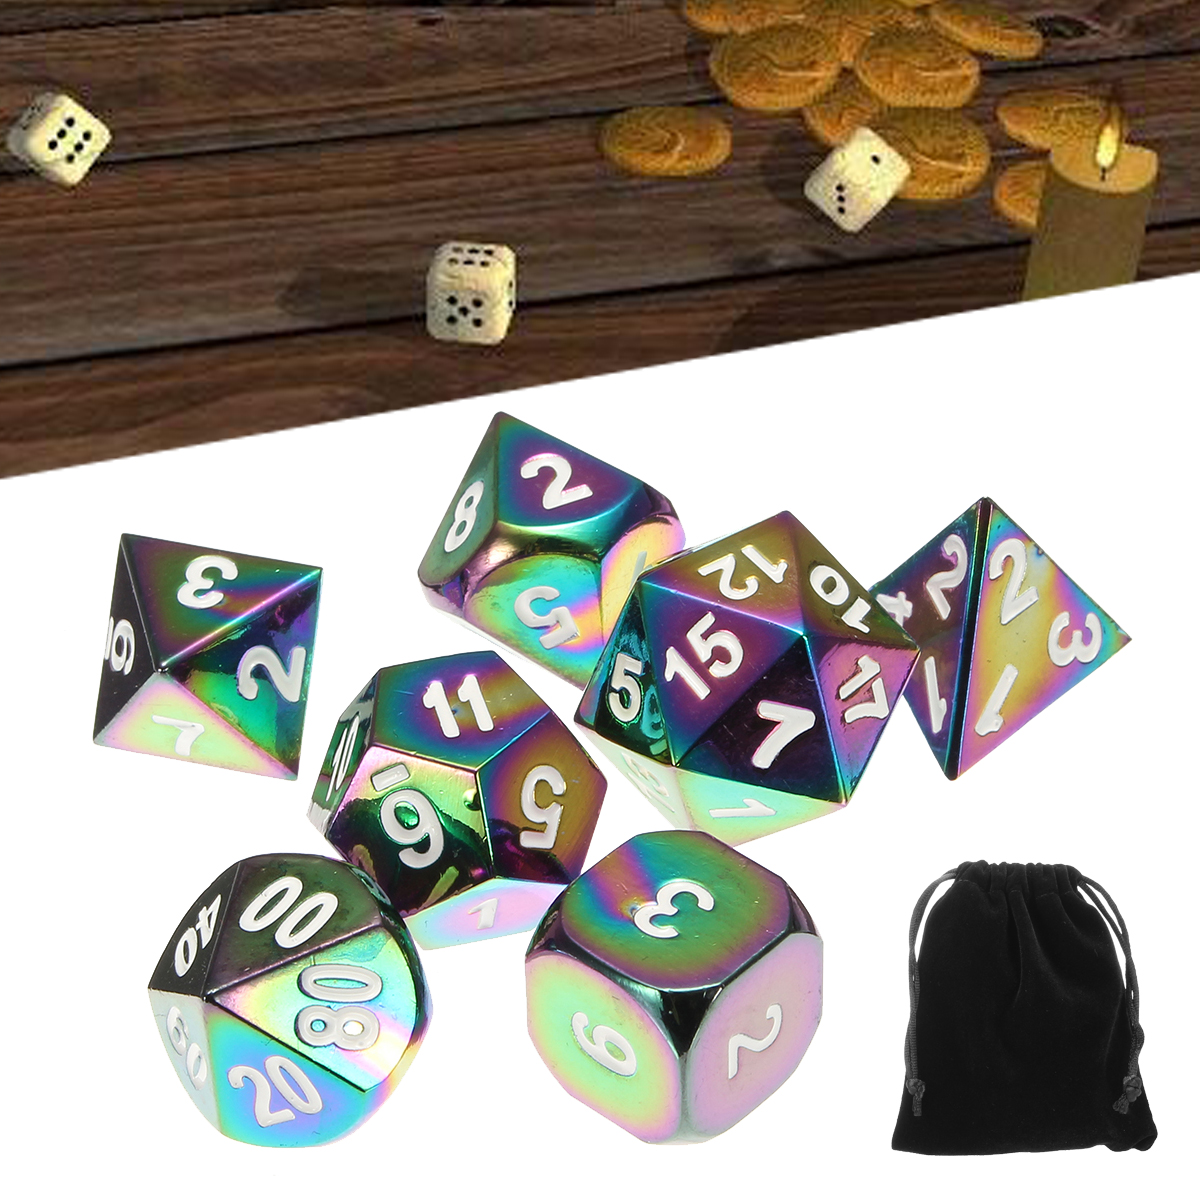 7Pcs-Colorful-Zinc-Alloy-Polyhedral-Dice-Set-Board-Game-Multisided-Dices-Gadget-1241484-3